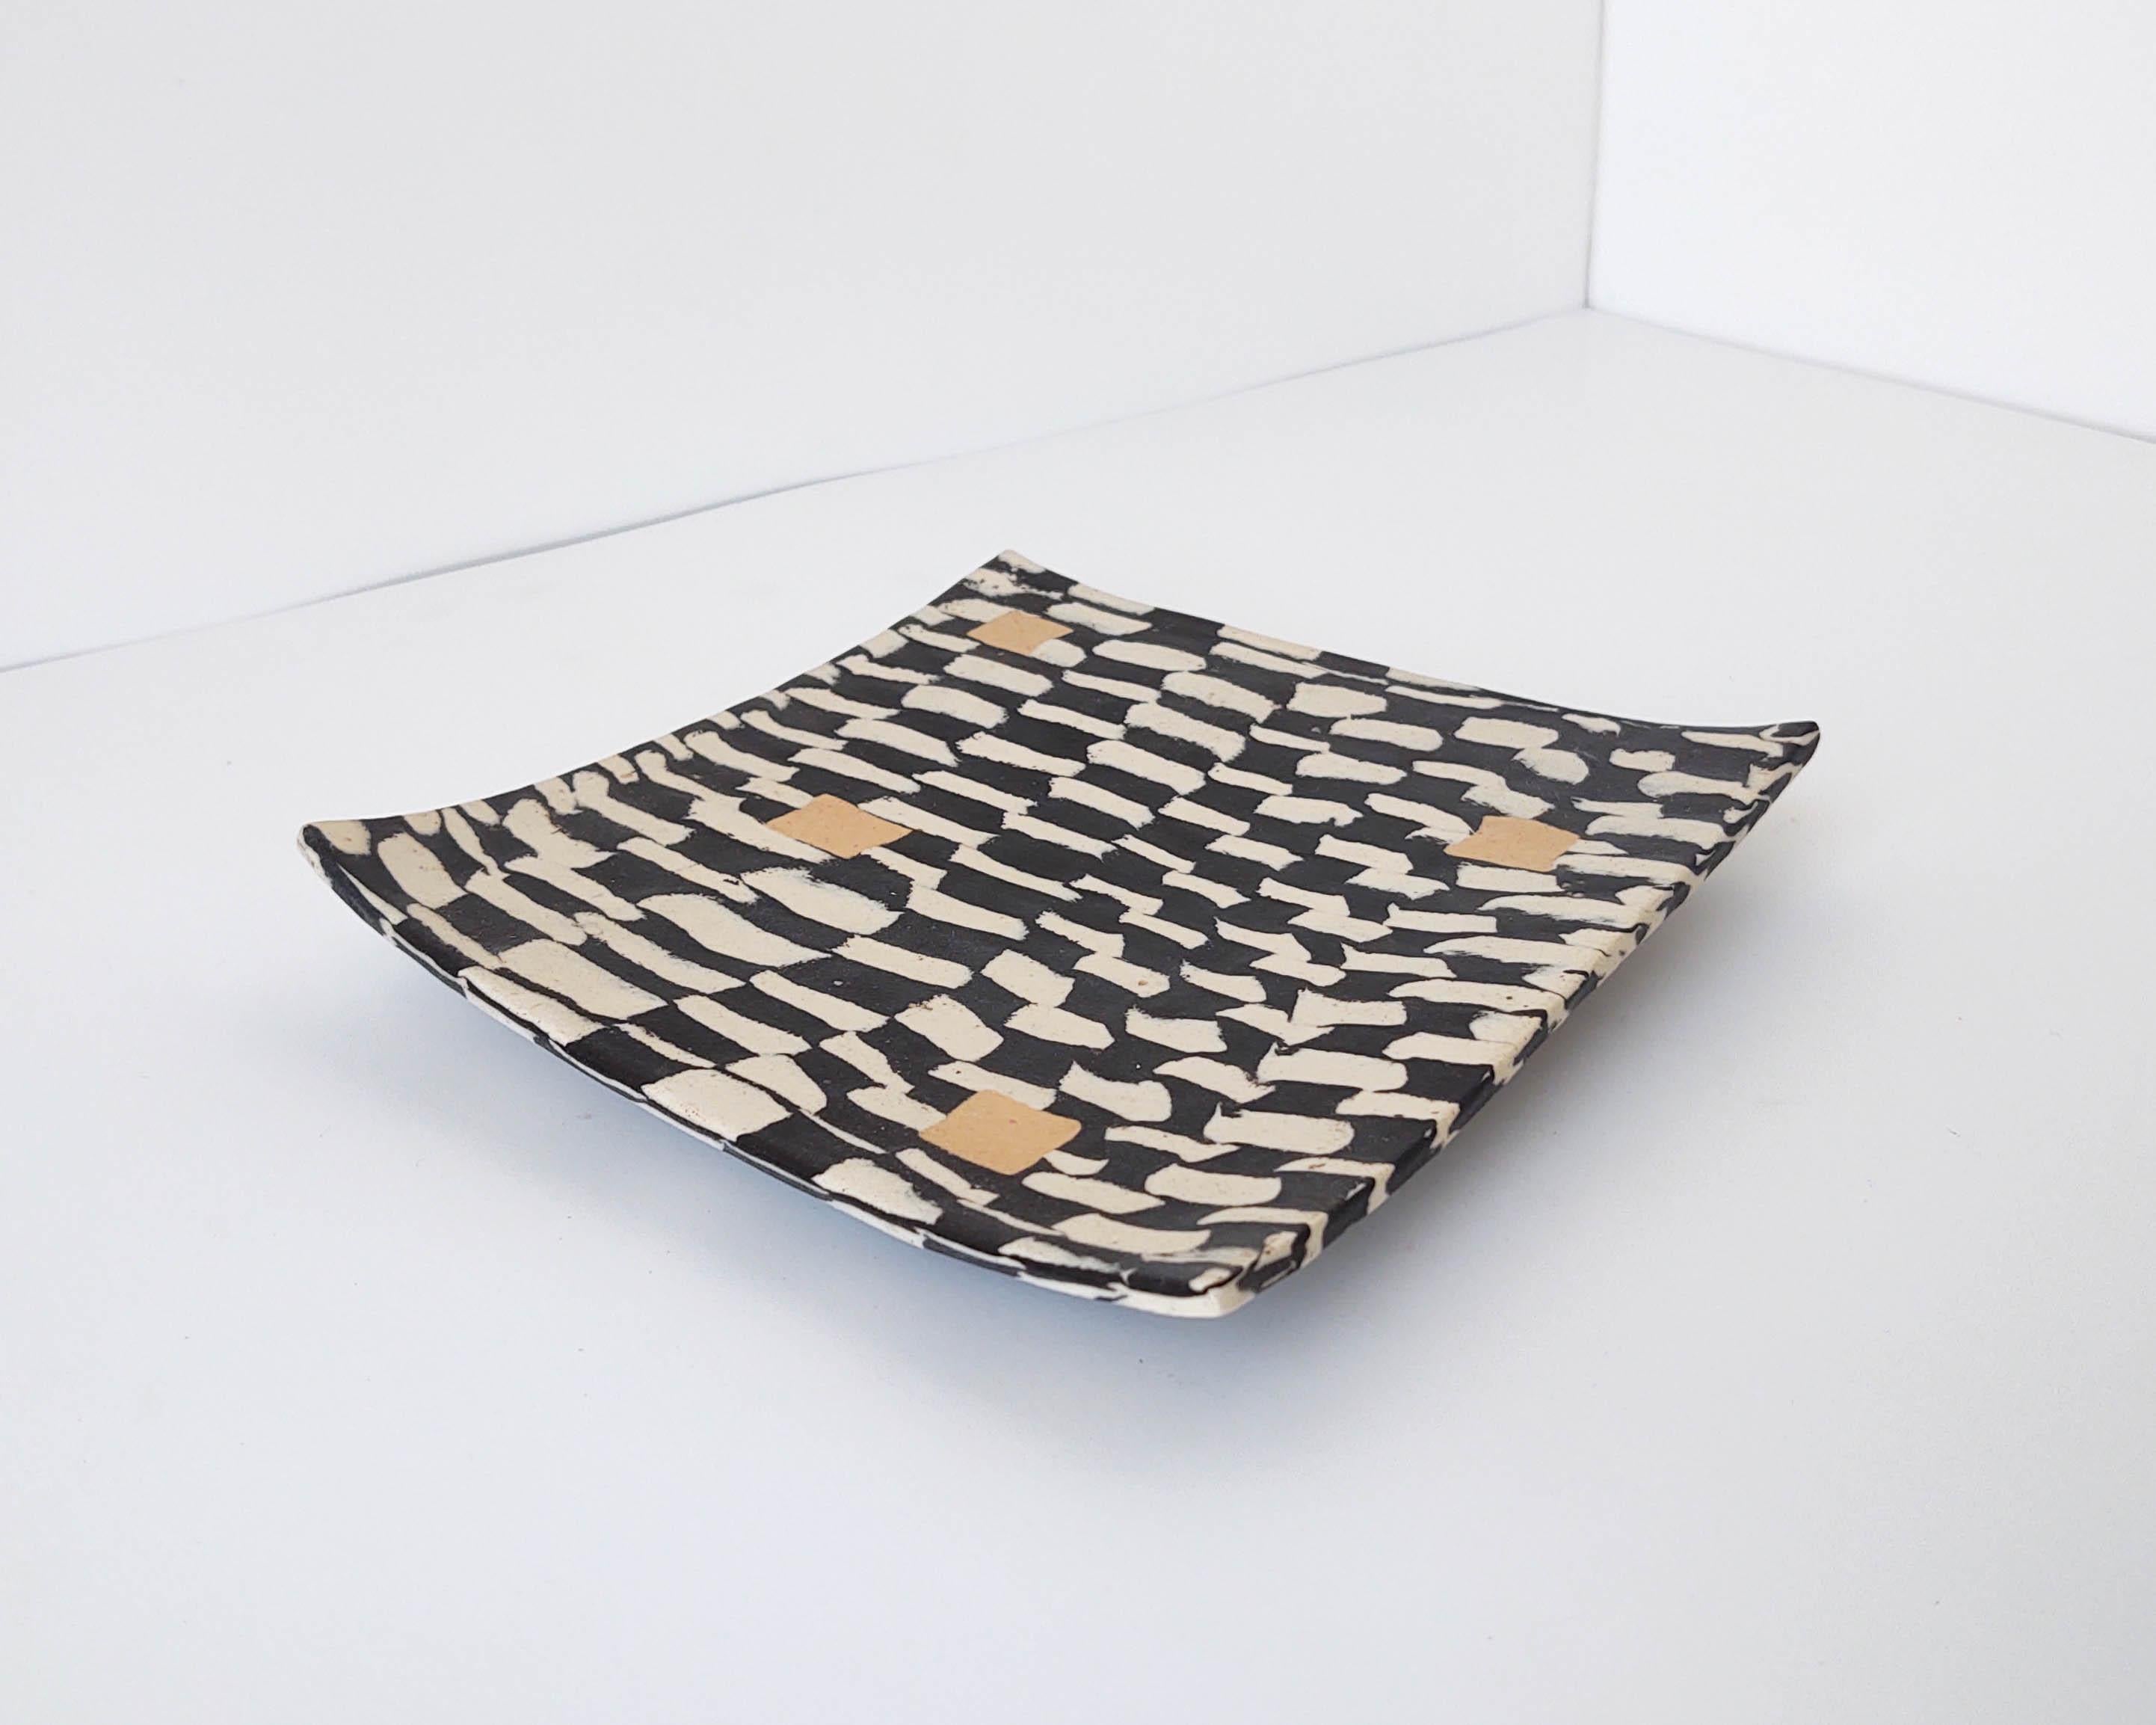 Contemporary Nerikomi Abstract Checkered Ceramic Plate with Peach Accent by Fizzy Ceramics